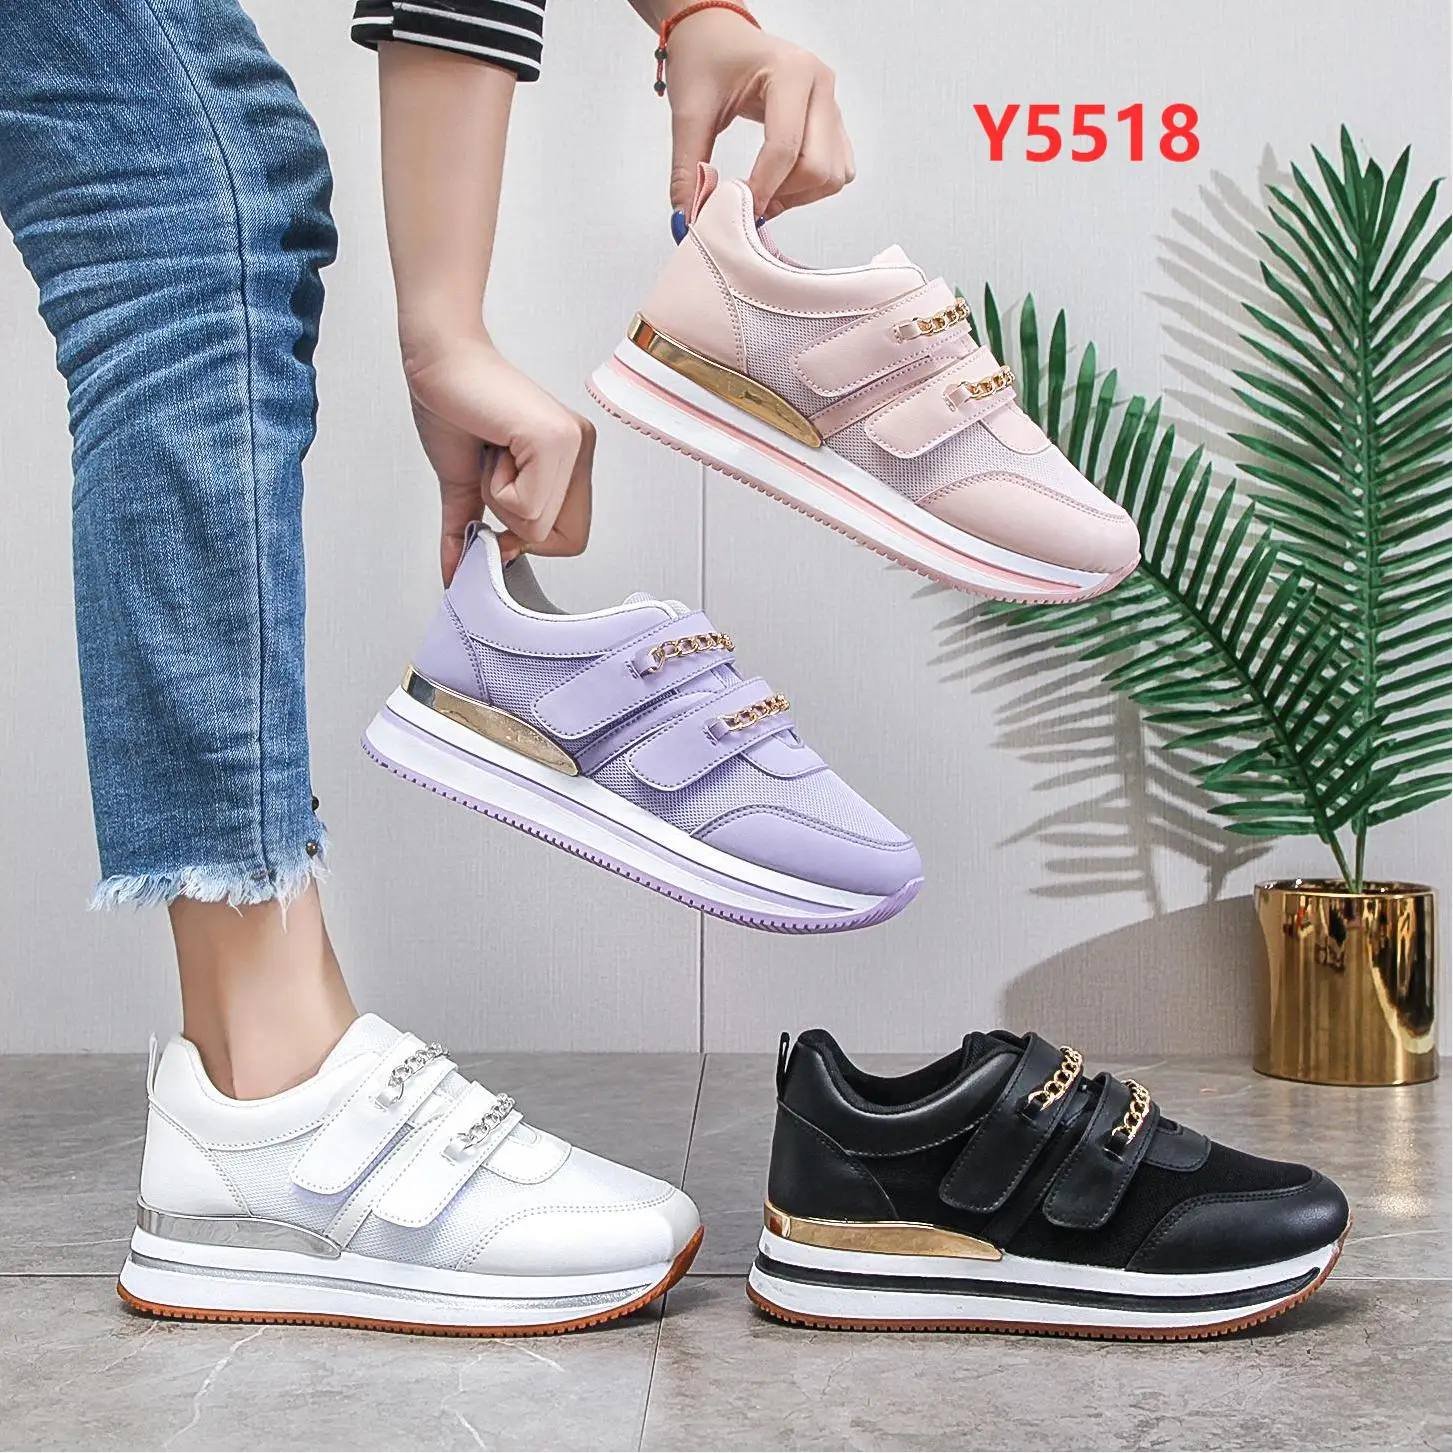 Fashion walking shoes Running Sneakers New Arrivals Girls Lace Up Suede Fashion Casual shoes